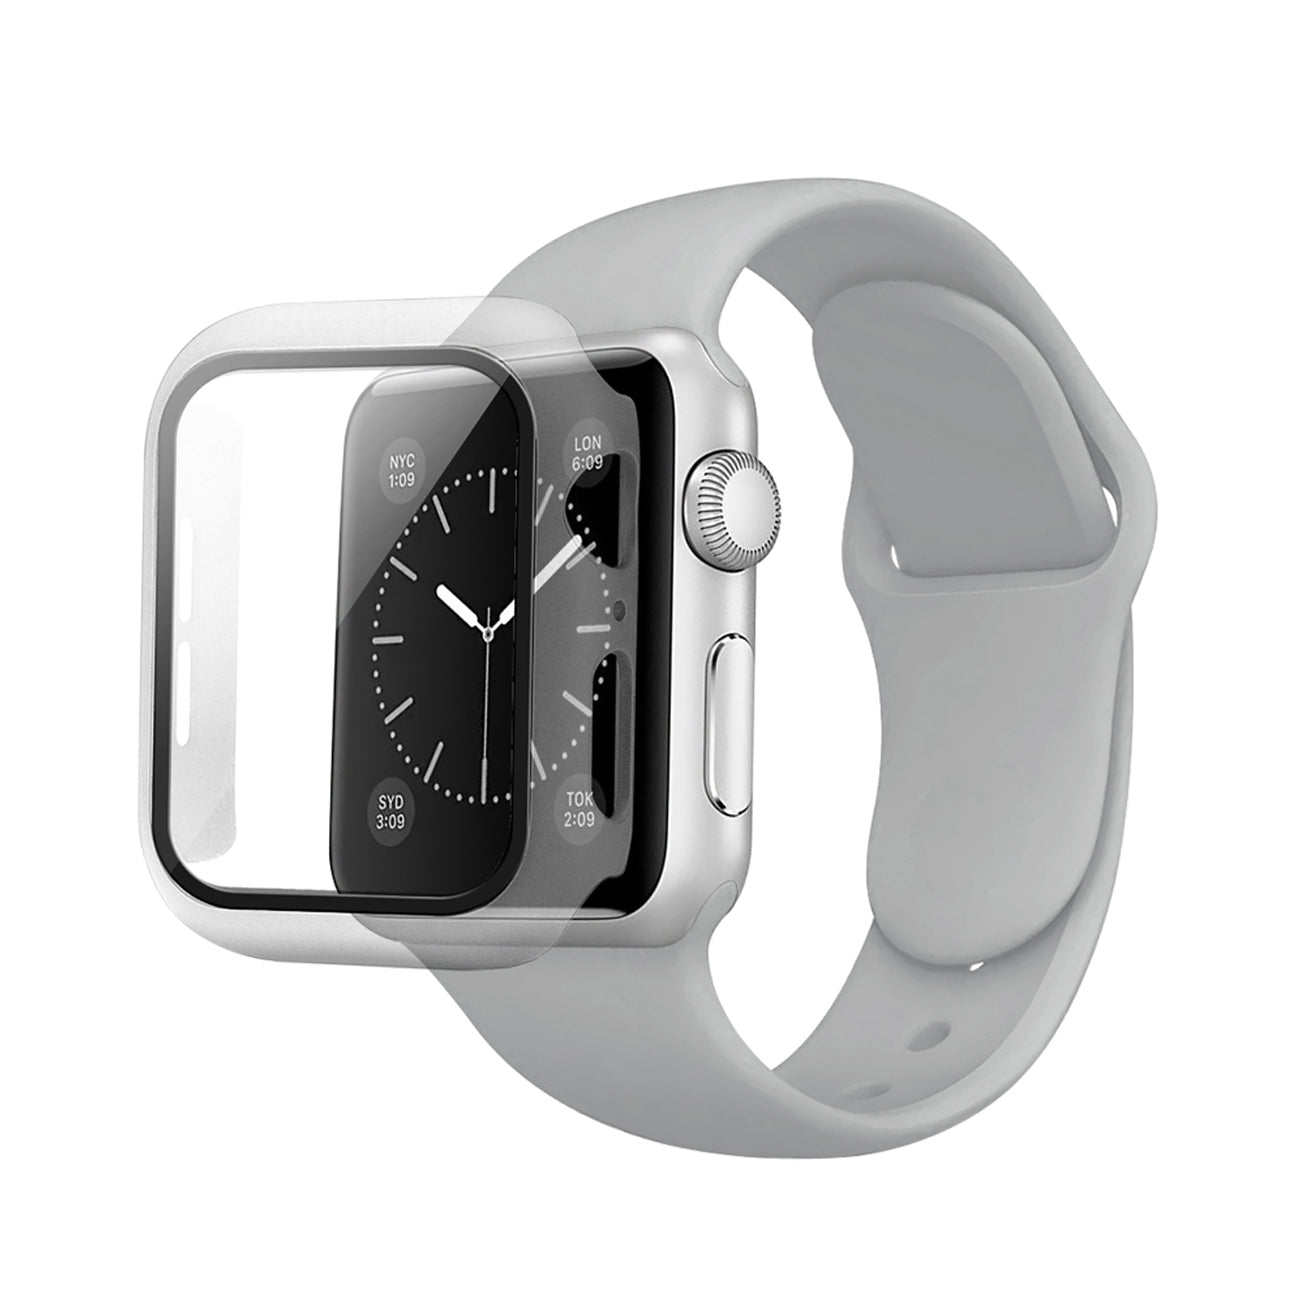 Watch Case PC With Glass Screen Protector, Silicone Watch Band Apple Watch 44mm Gray Color